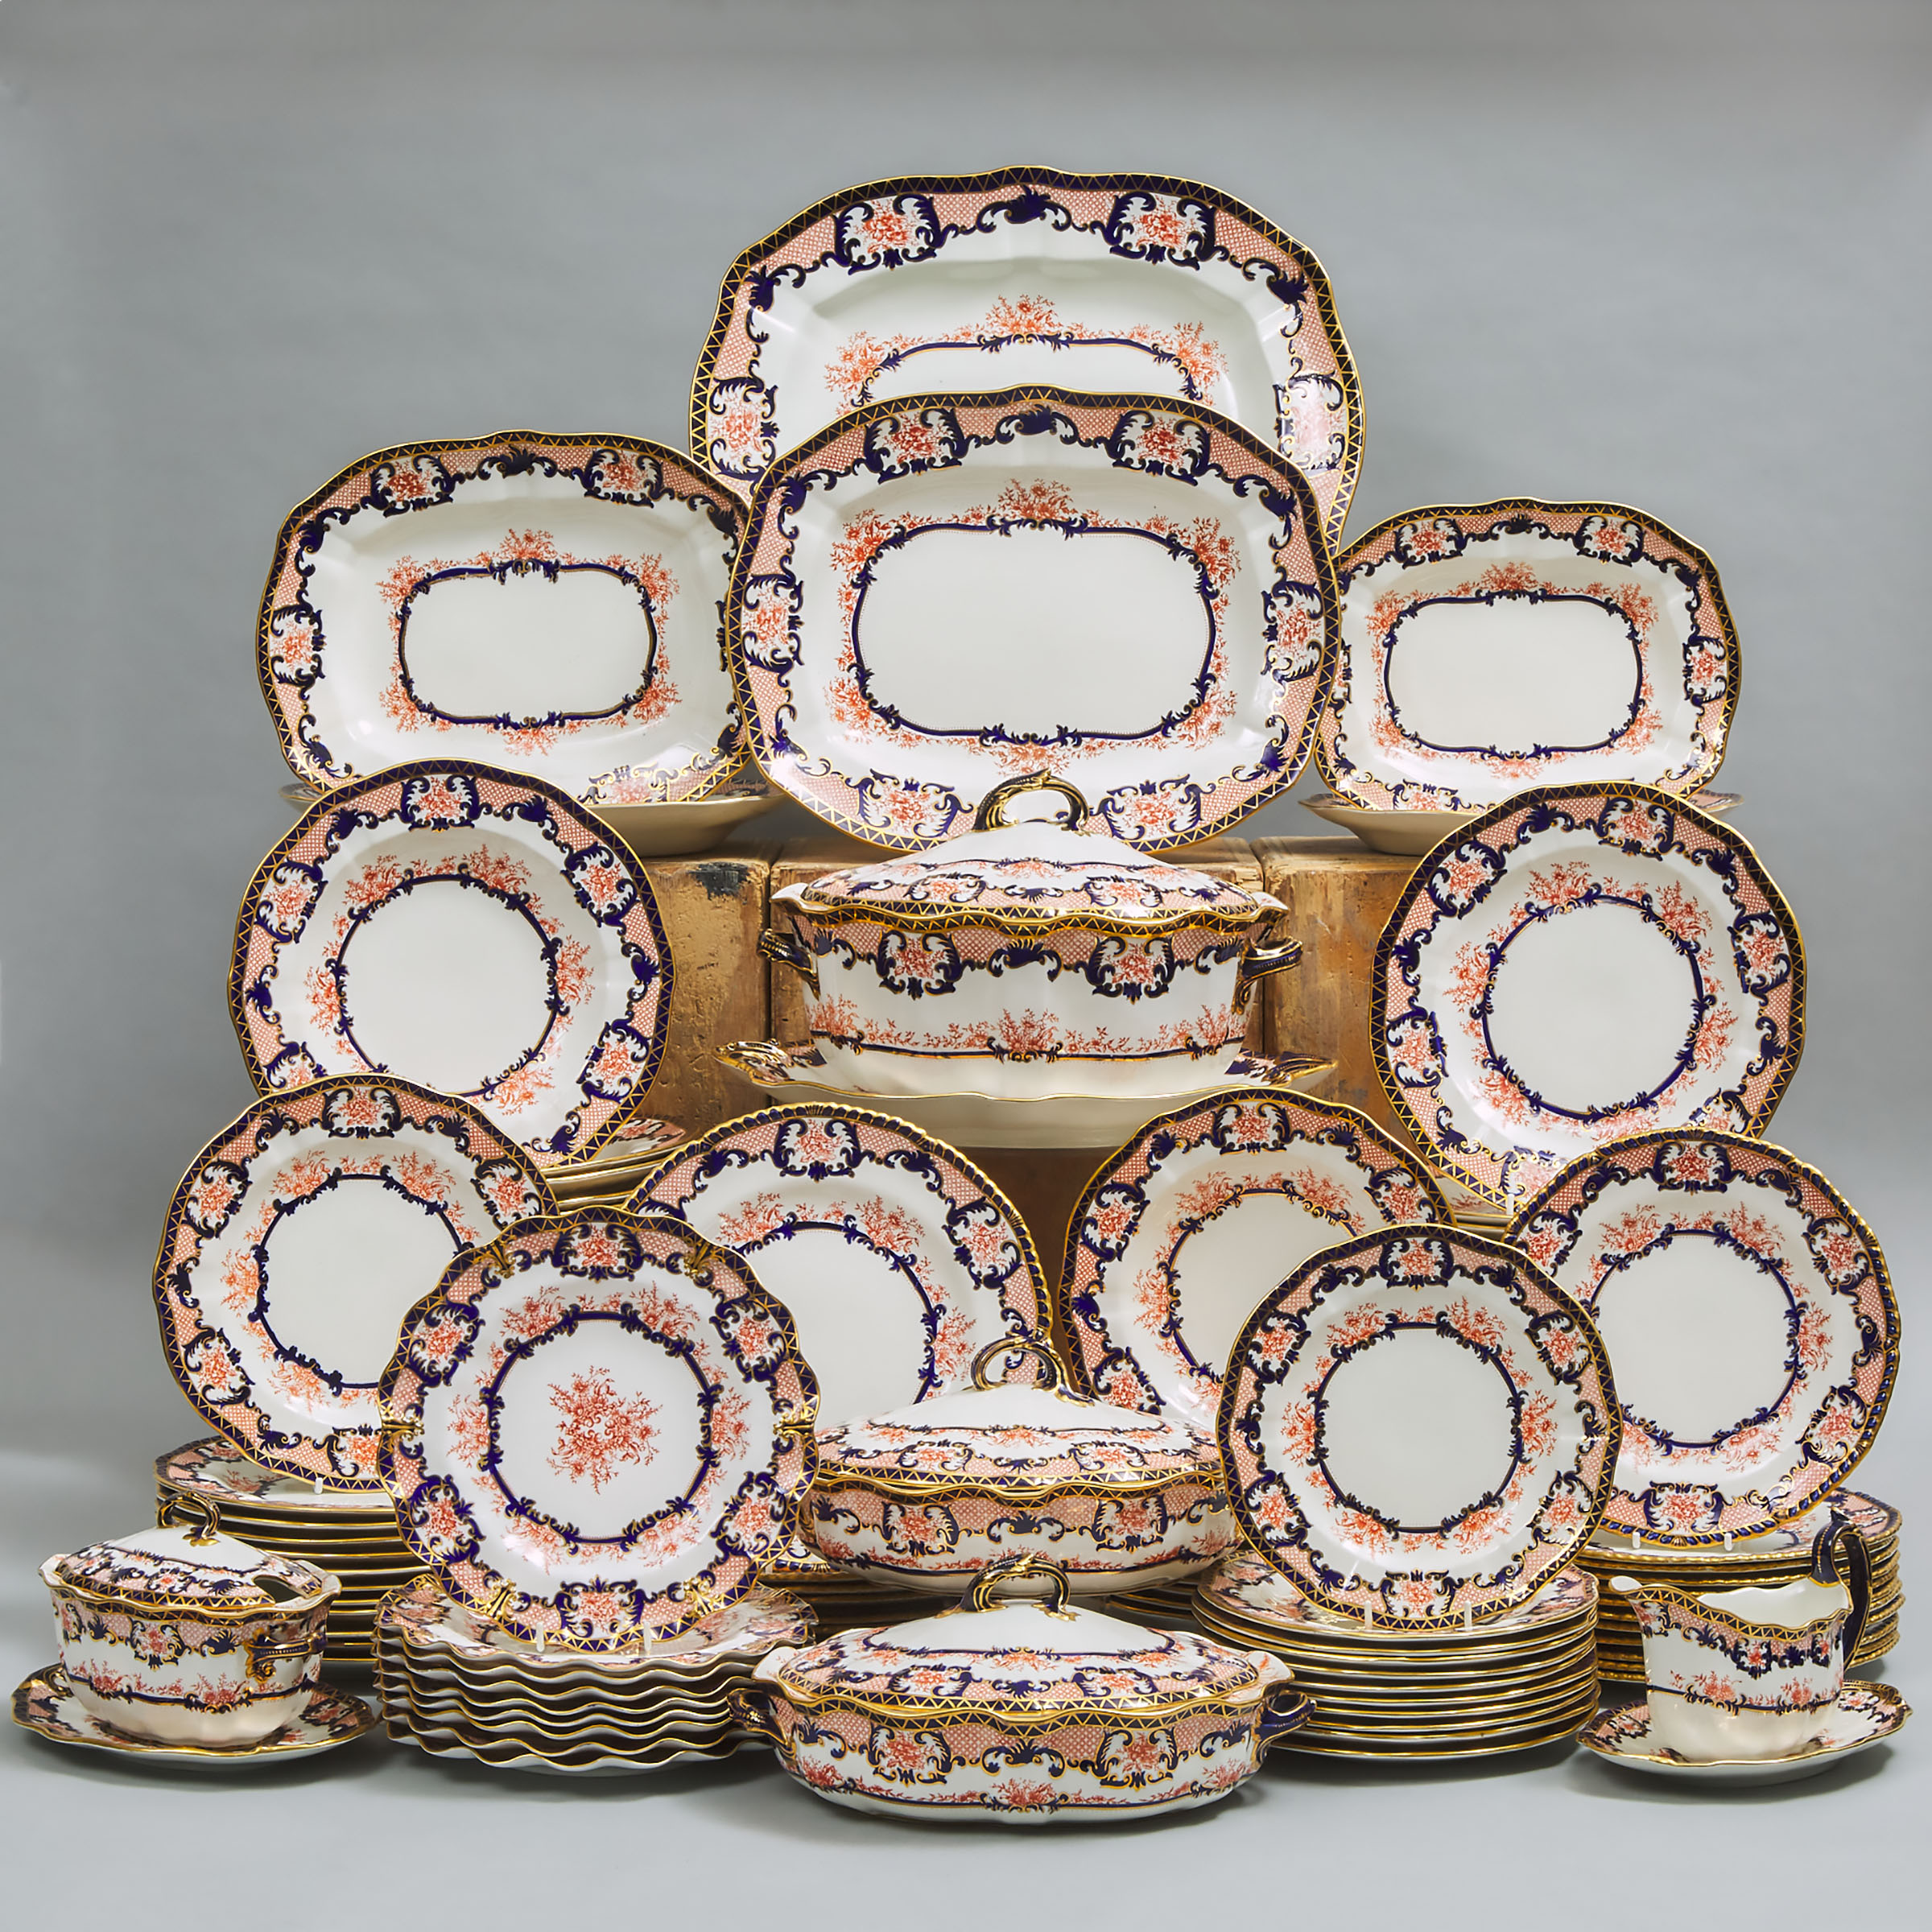 Royal Crown Derby 'Imari' (3653 and 5126) Pattern Service, 20th century